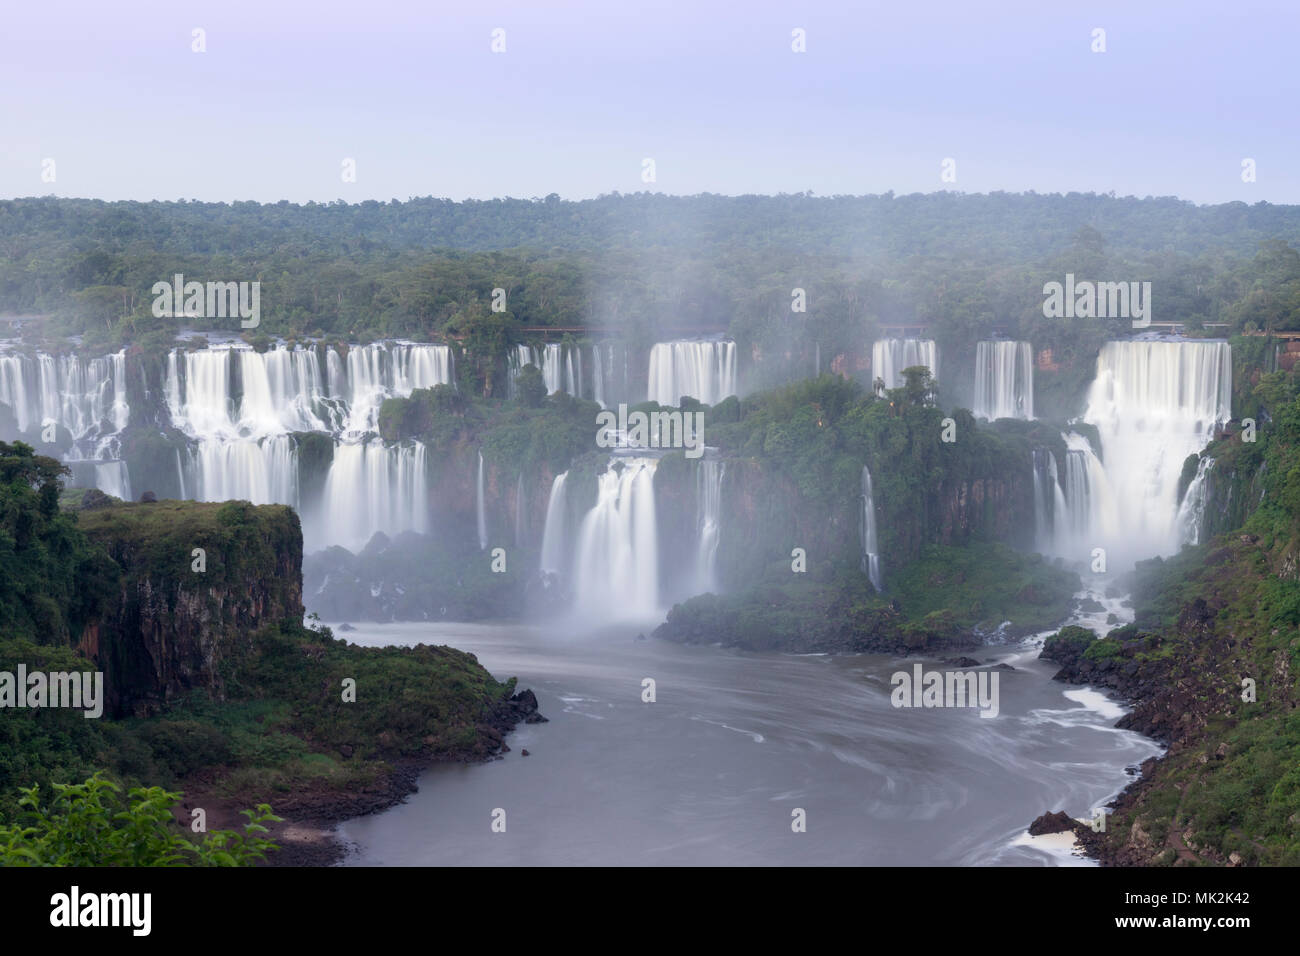 The Iguassu or Iguacu falls - the world's biggest waterfall system on the border of Brazil an Argentina Stock Photo